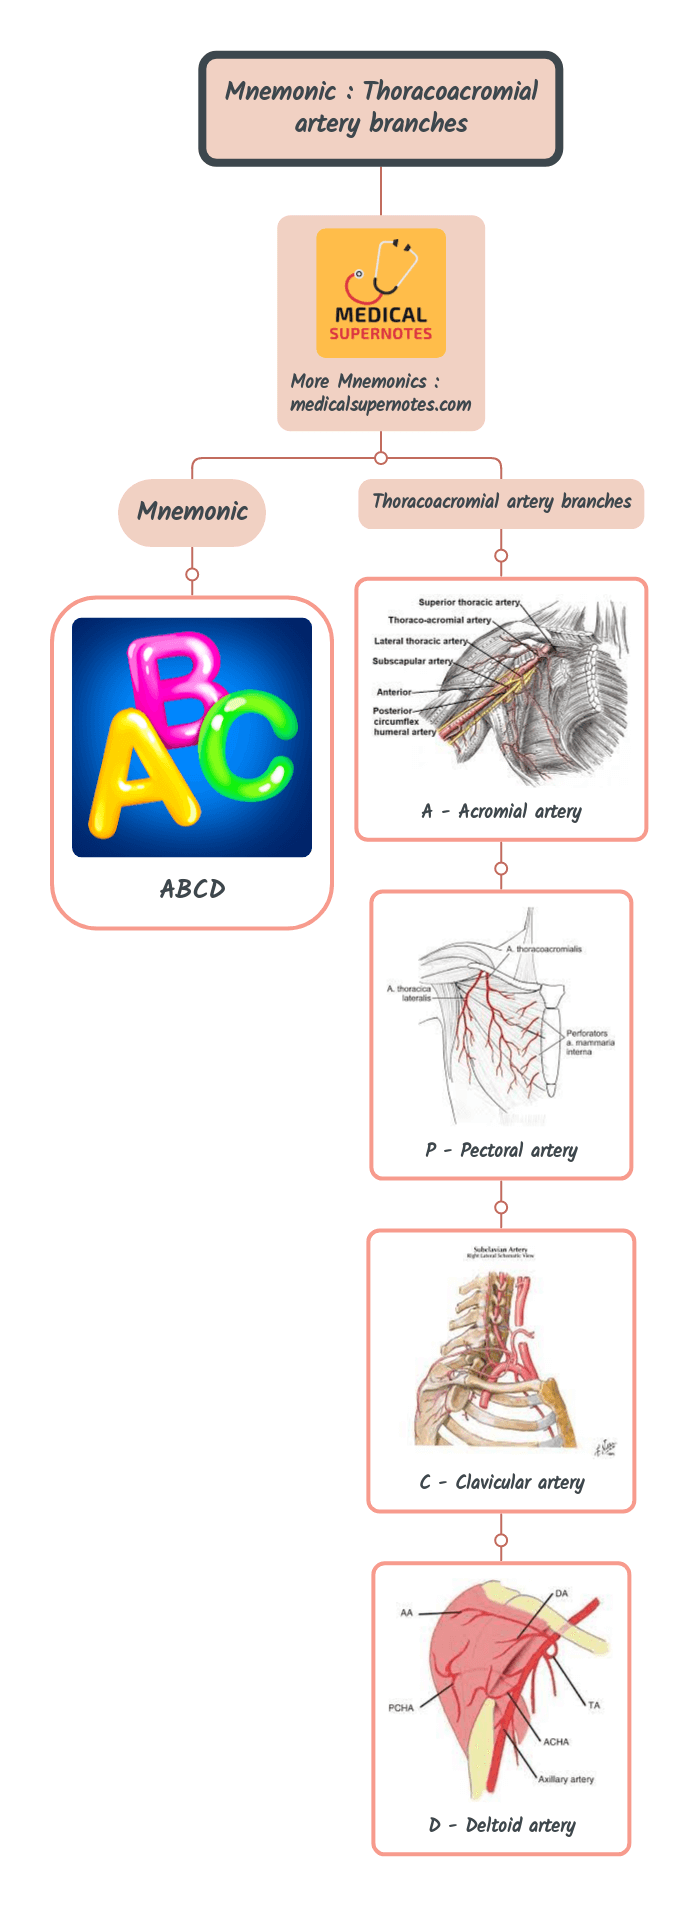 Mnemonic _ Thoracoacromial artery branches